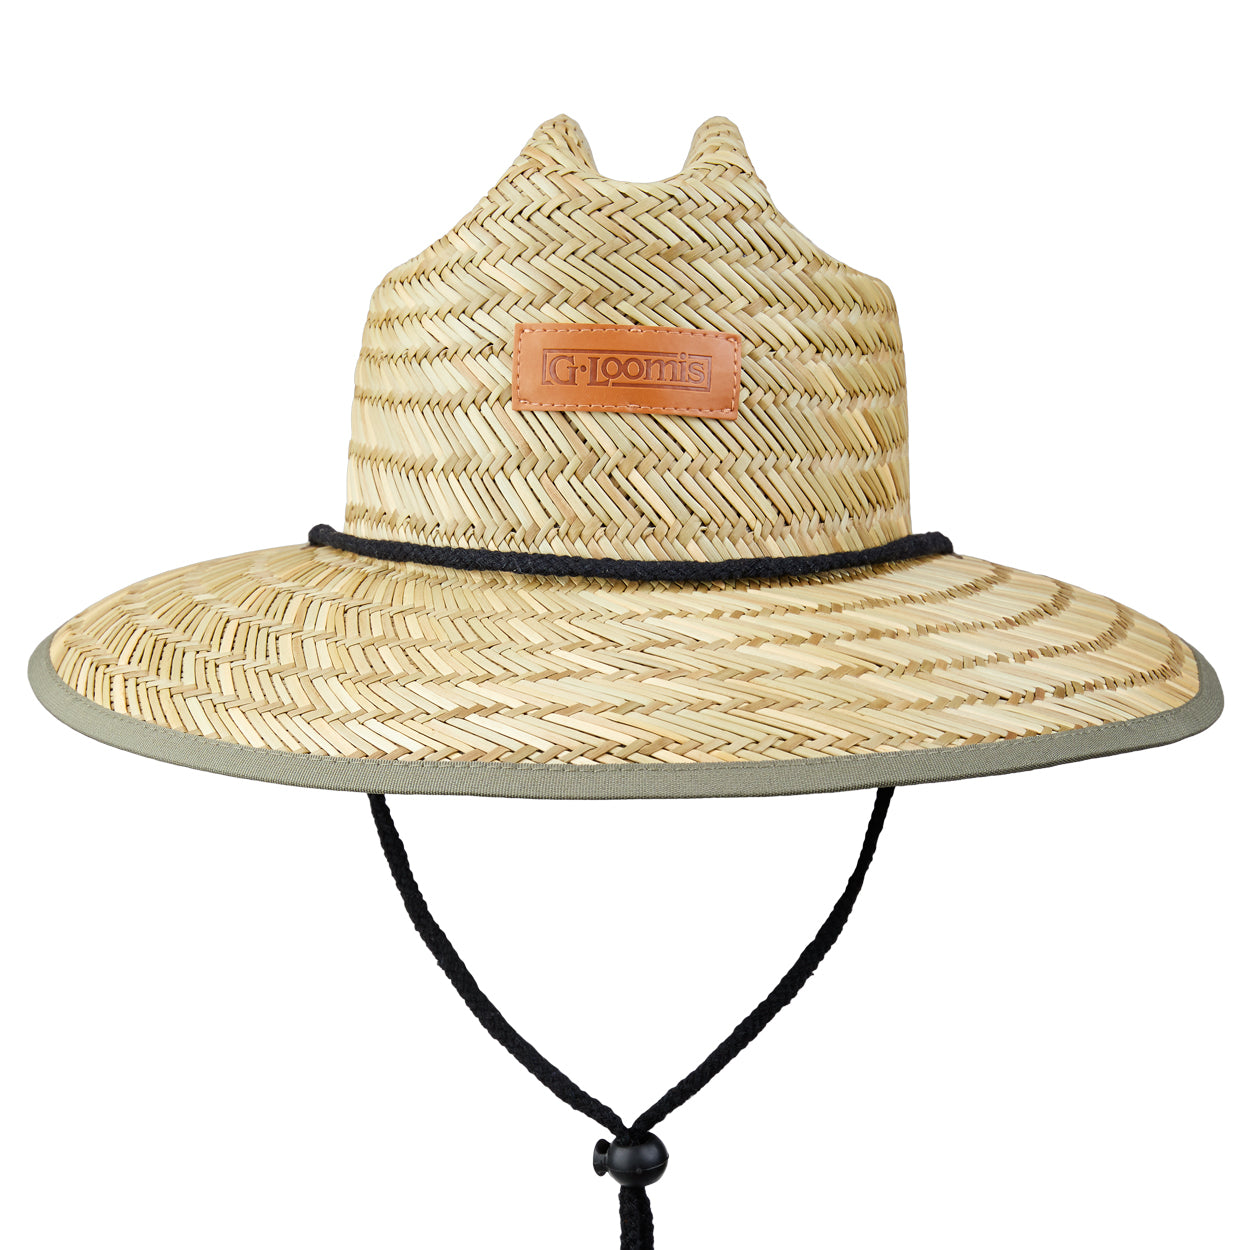 G Loomis Leather Patch Sunseeker Straw Hat - Addict Tackle